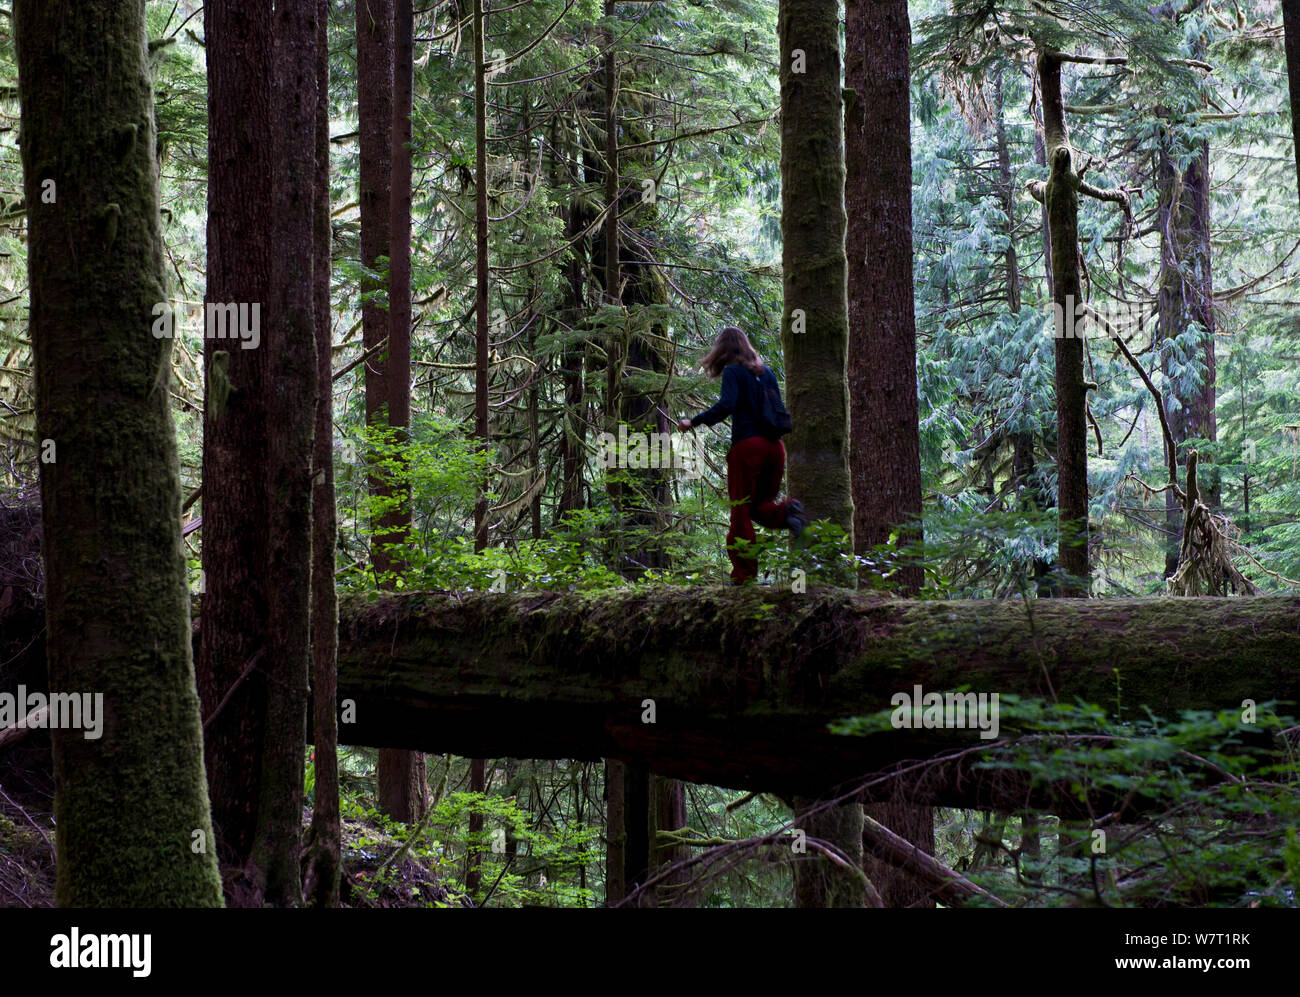 Woman walking over a fallen tree trunk in old growth forest of Red cedar trees (Thuja plicata) and Douglas fir trees (Pseudotsuga menziesii) Avatar Grove, near Port Renfrew, Vancouver Island, Canada, July 2012. Stock Photo